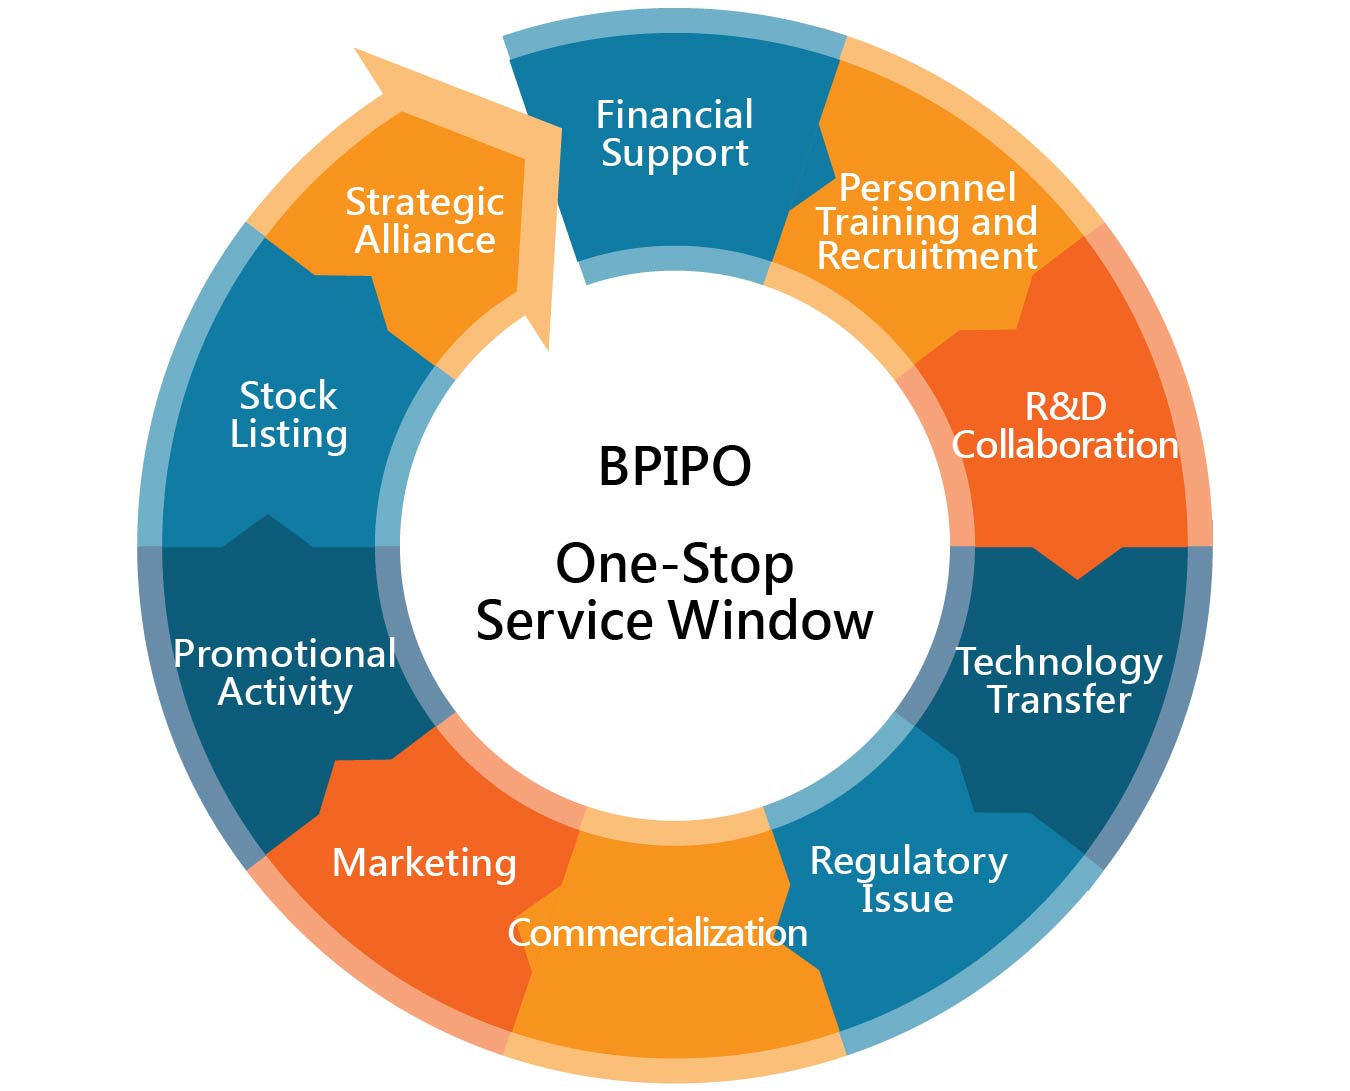 BPIPO One-Stop Service Window